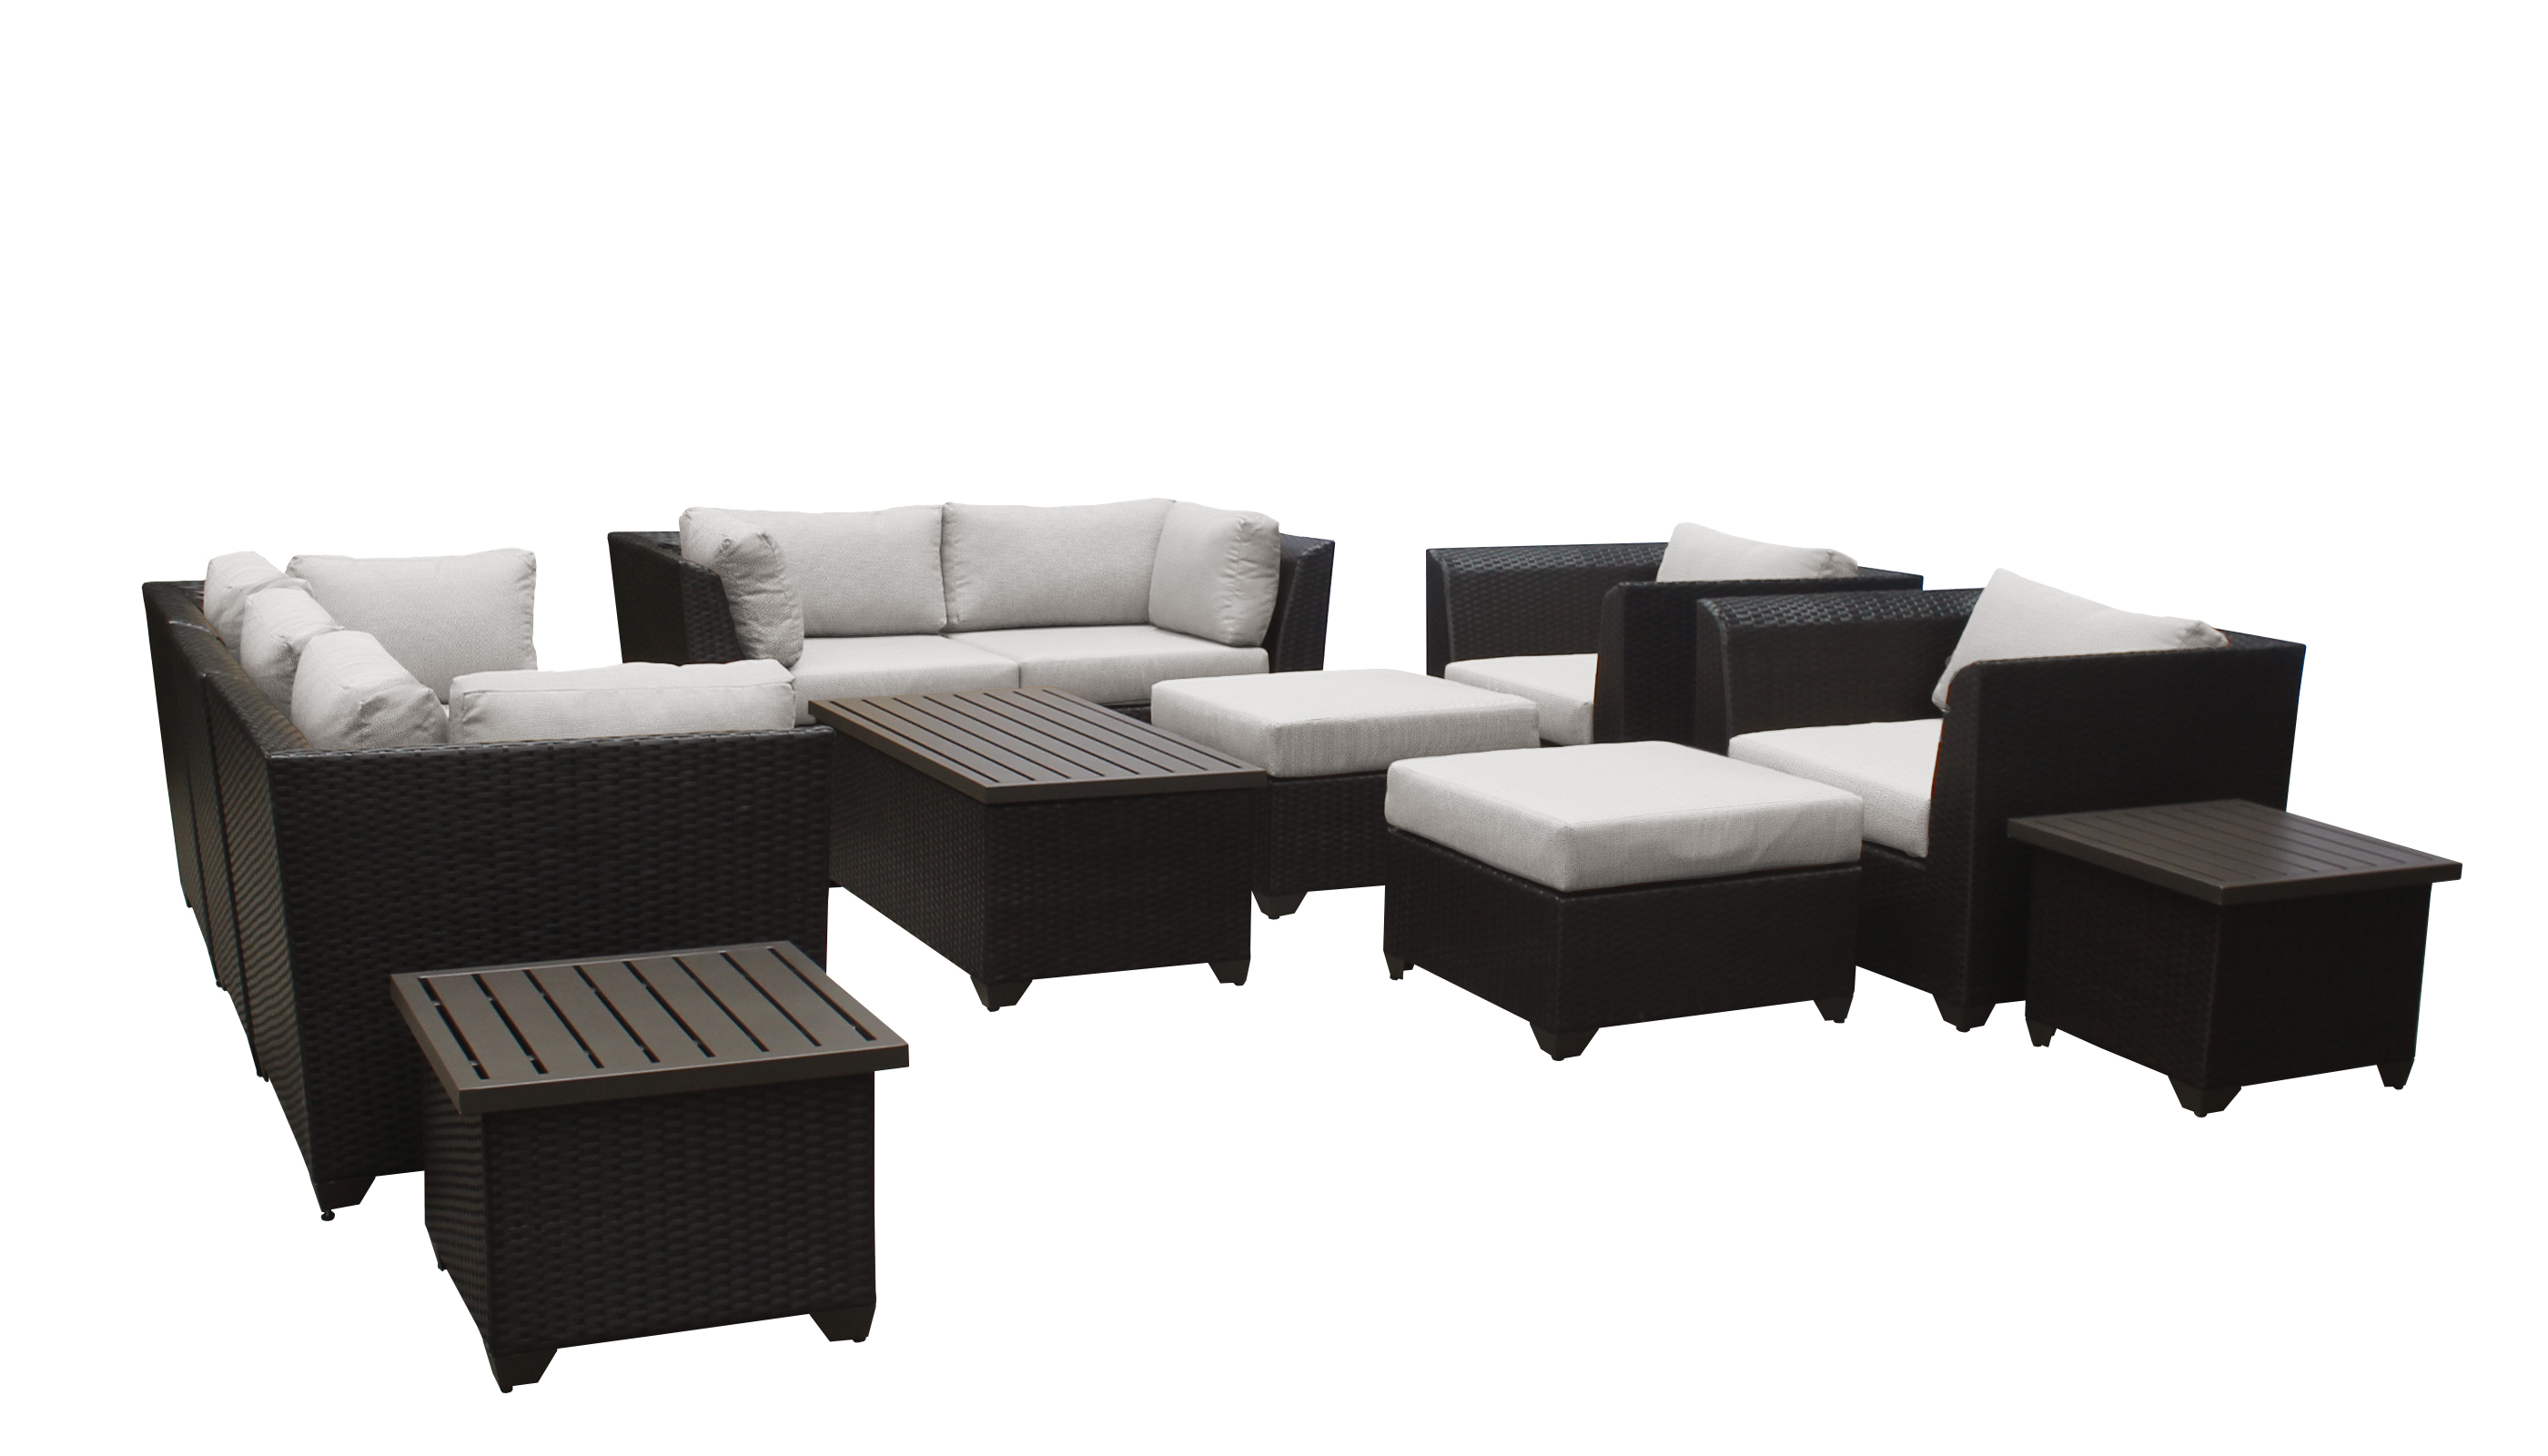 TK Classics Barbados 12 Piece Wicker Outdoor Sectional Seating Group with Storage Coffee Table and End Tables, Ash - image 3 of 11